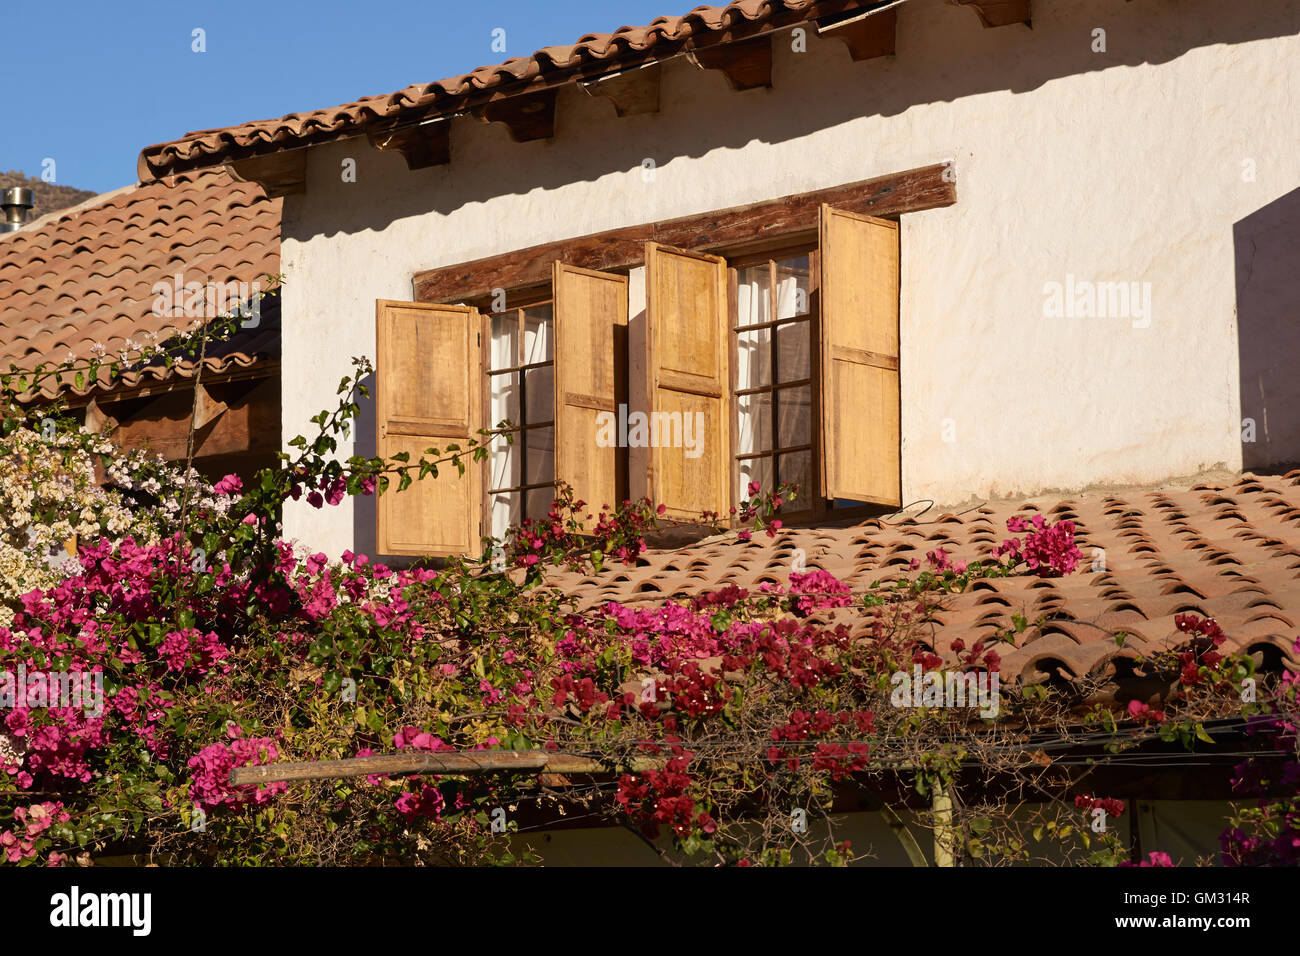 Spanish style architecture of the historic Hacienda Juntas in the Limari Valley of central Chile Stock Photo